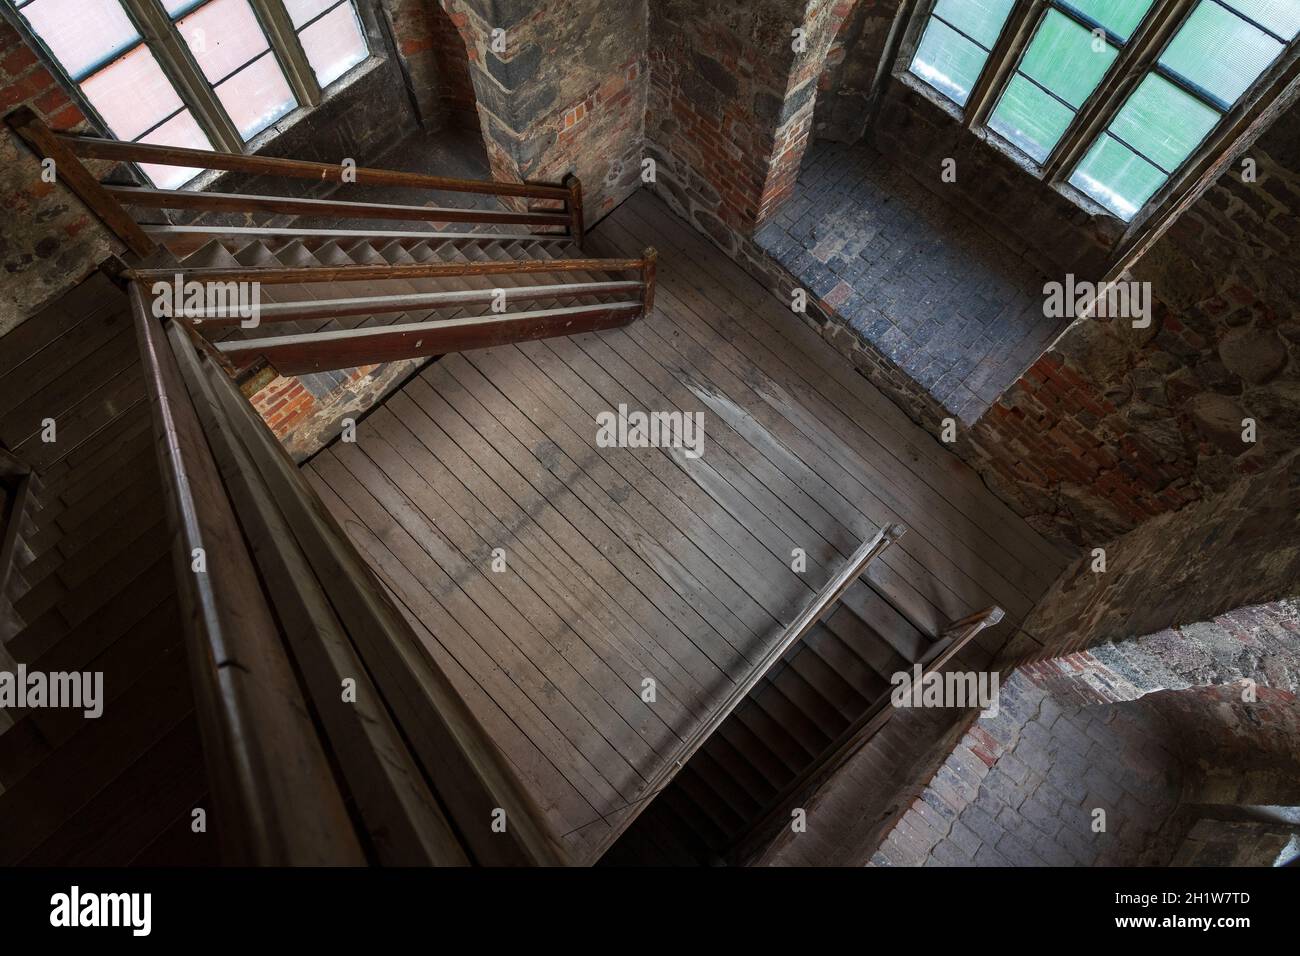 JUETERBOG, GERMANY - MAY 23, 2021: Belltower's interior of medieval St. Nikolai church. Juterbog is a historic town in north-eastern Germany, in the d Stock Photo